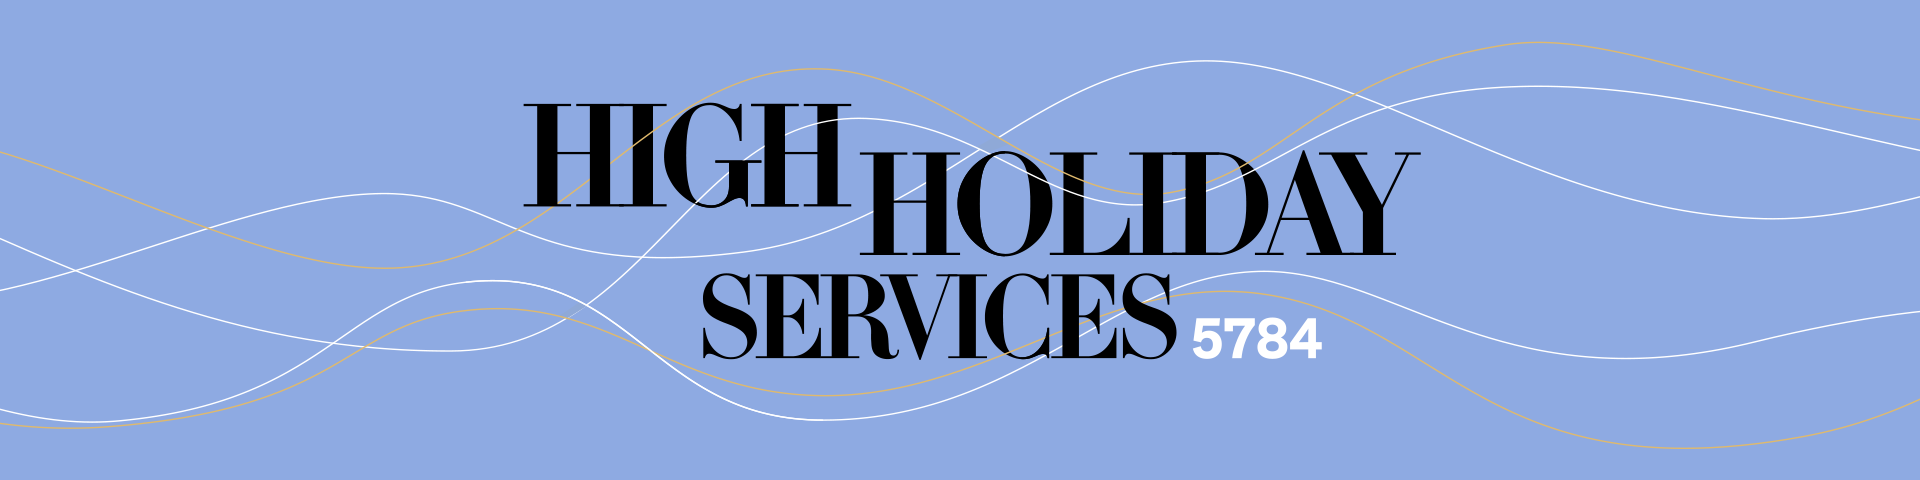 High Holiday Services 5784